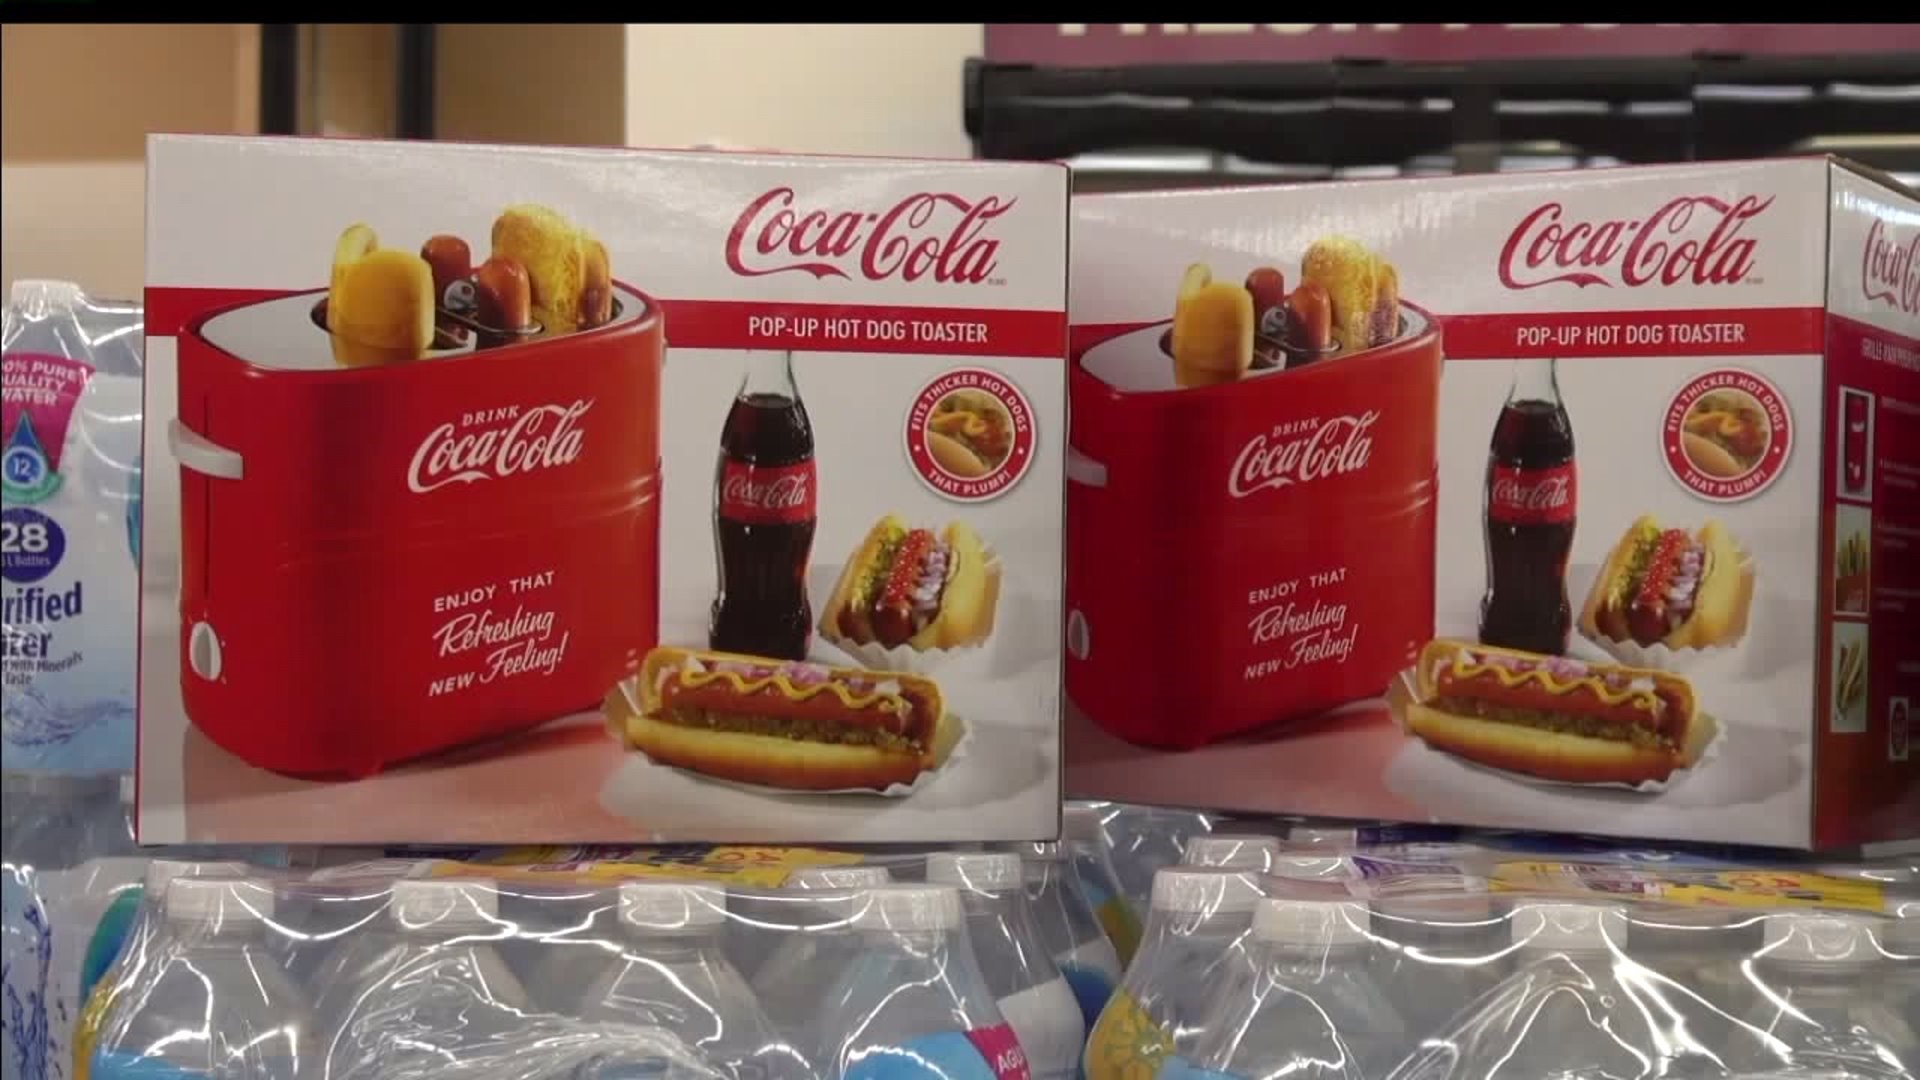 Does It Really Work: Coca-Cola Hot Dog Toaster